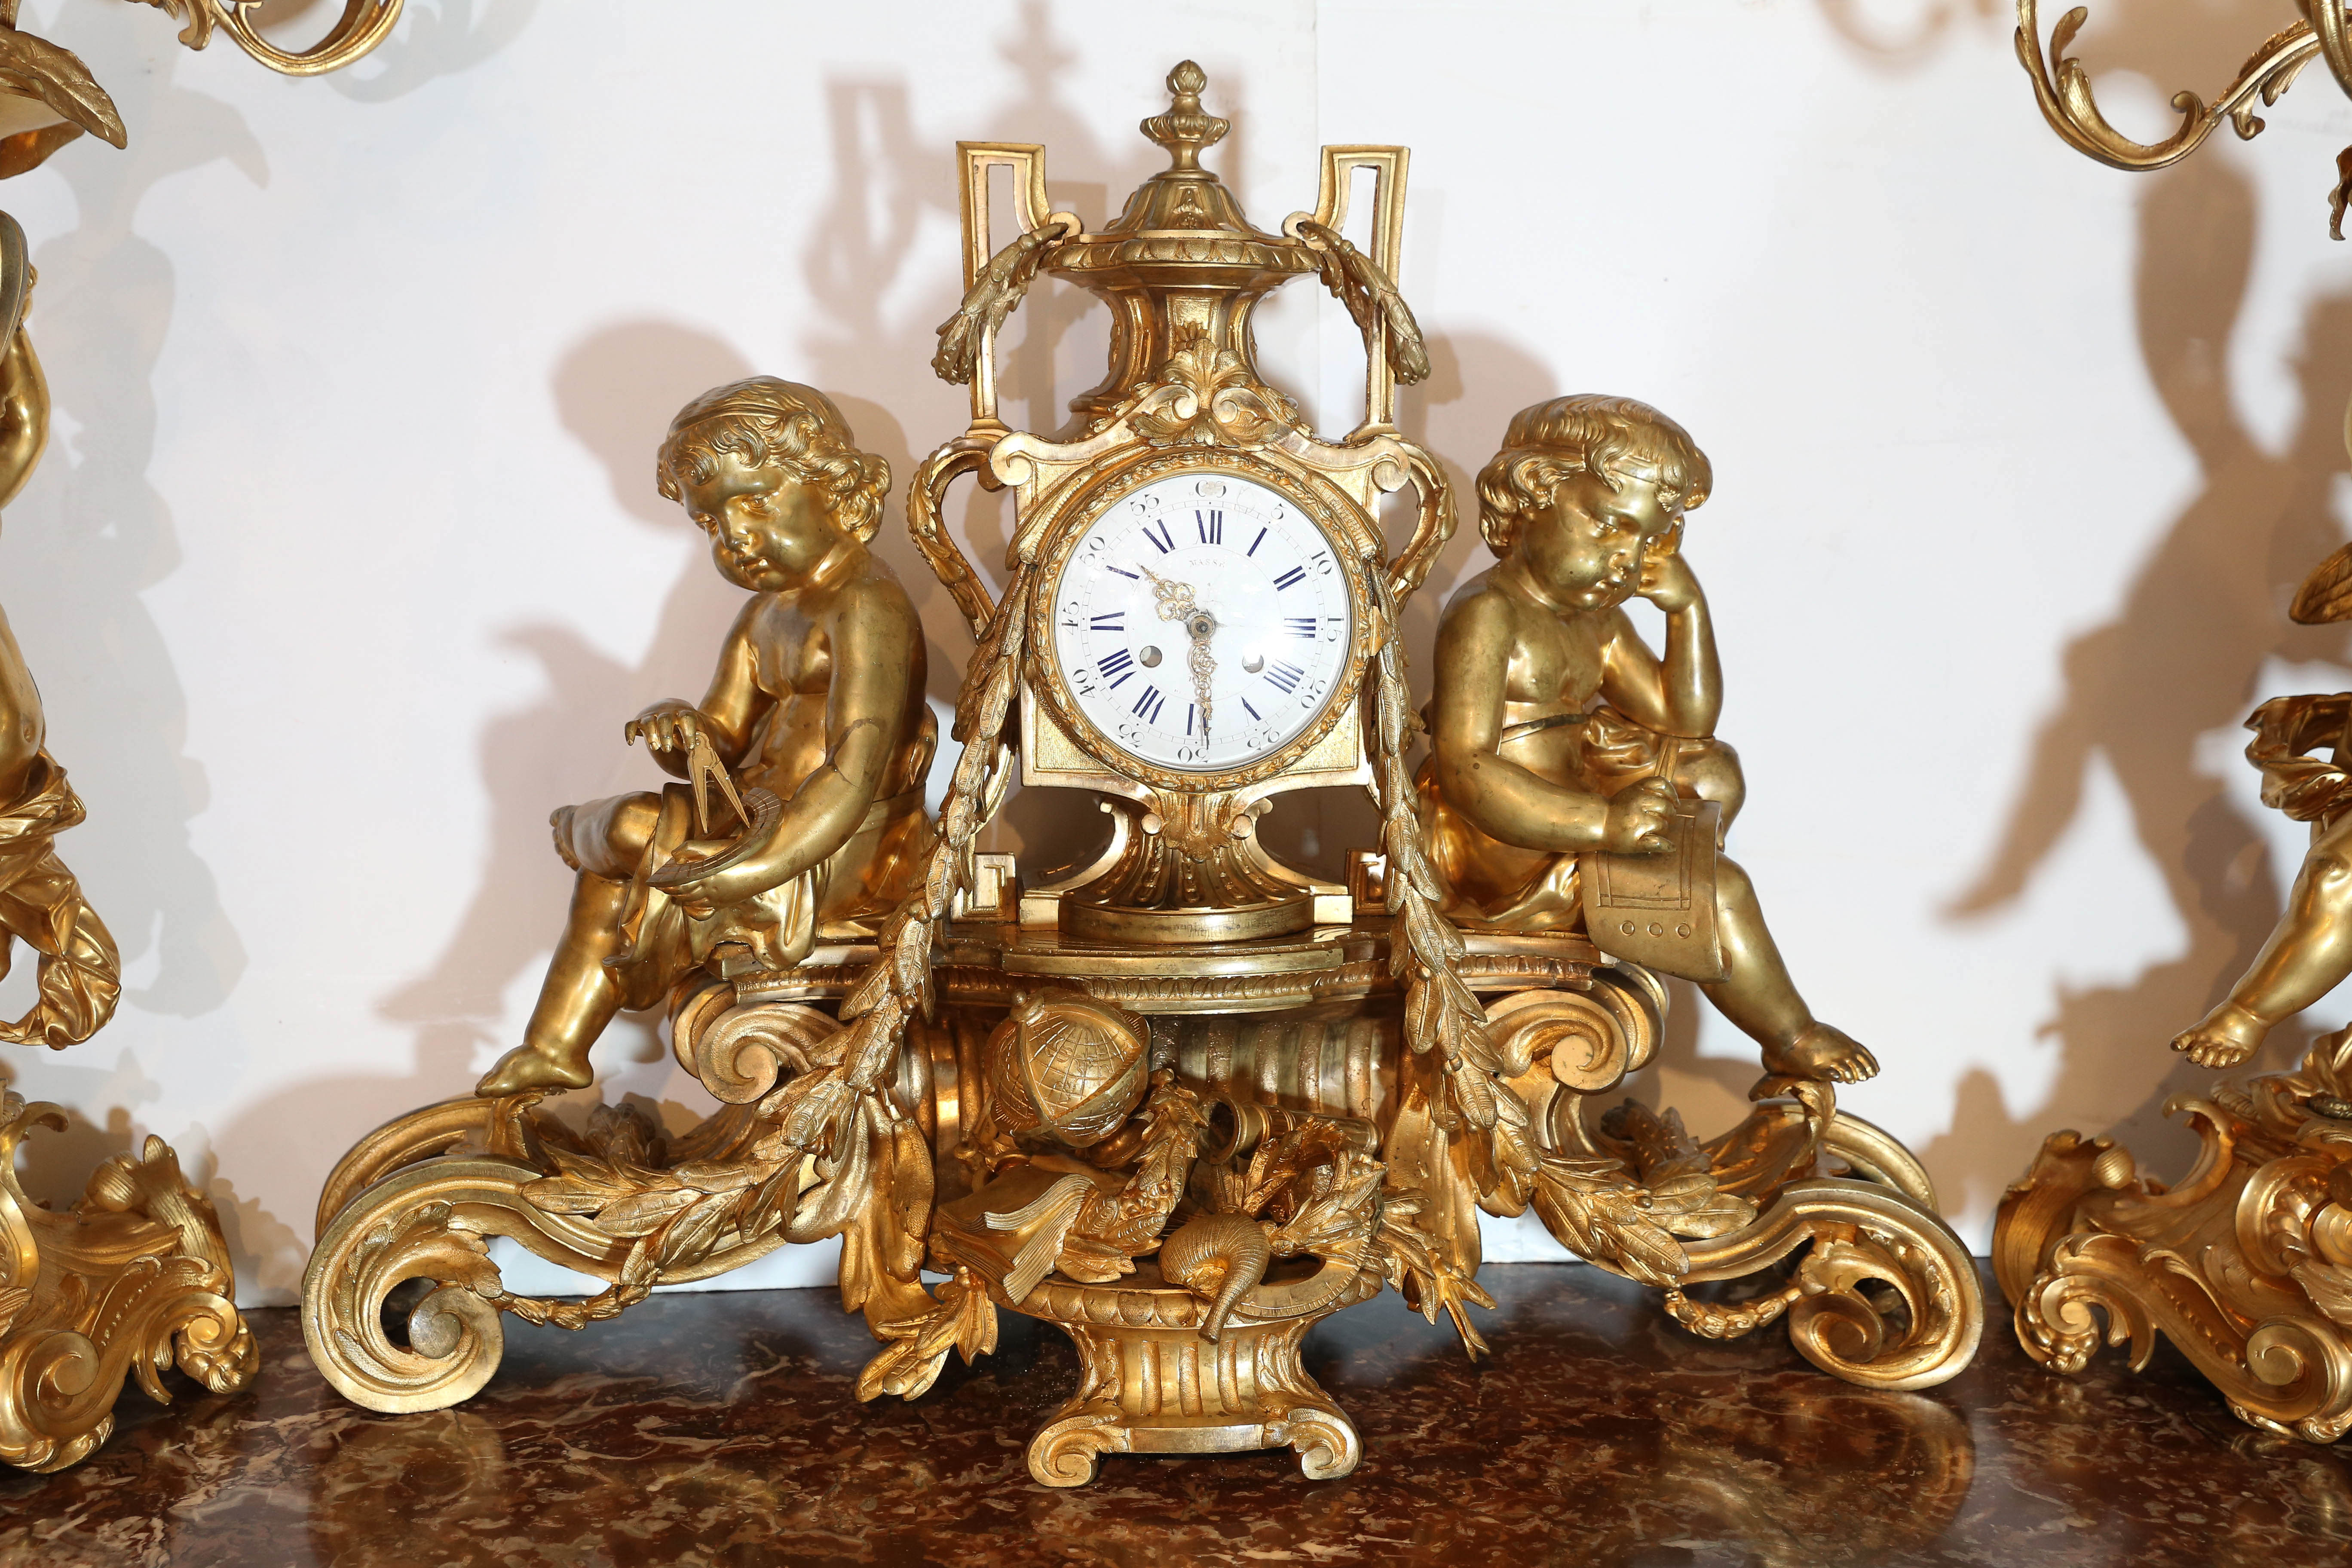 Large three-piece garniture set. Bronze doré clock has enamel face with Masse, Paris on the front. The figures of putti on the sides of the clock are holding a book and astrological instruments. At the base a globe, book and telescope embellish the